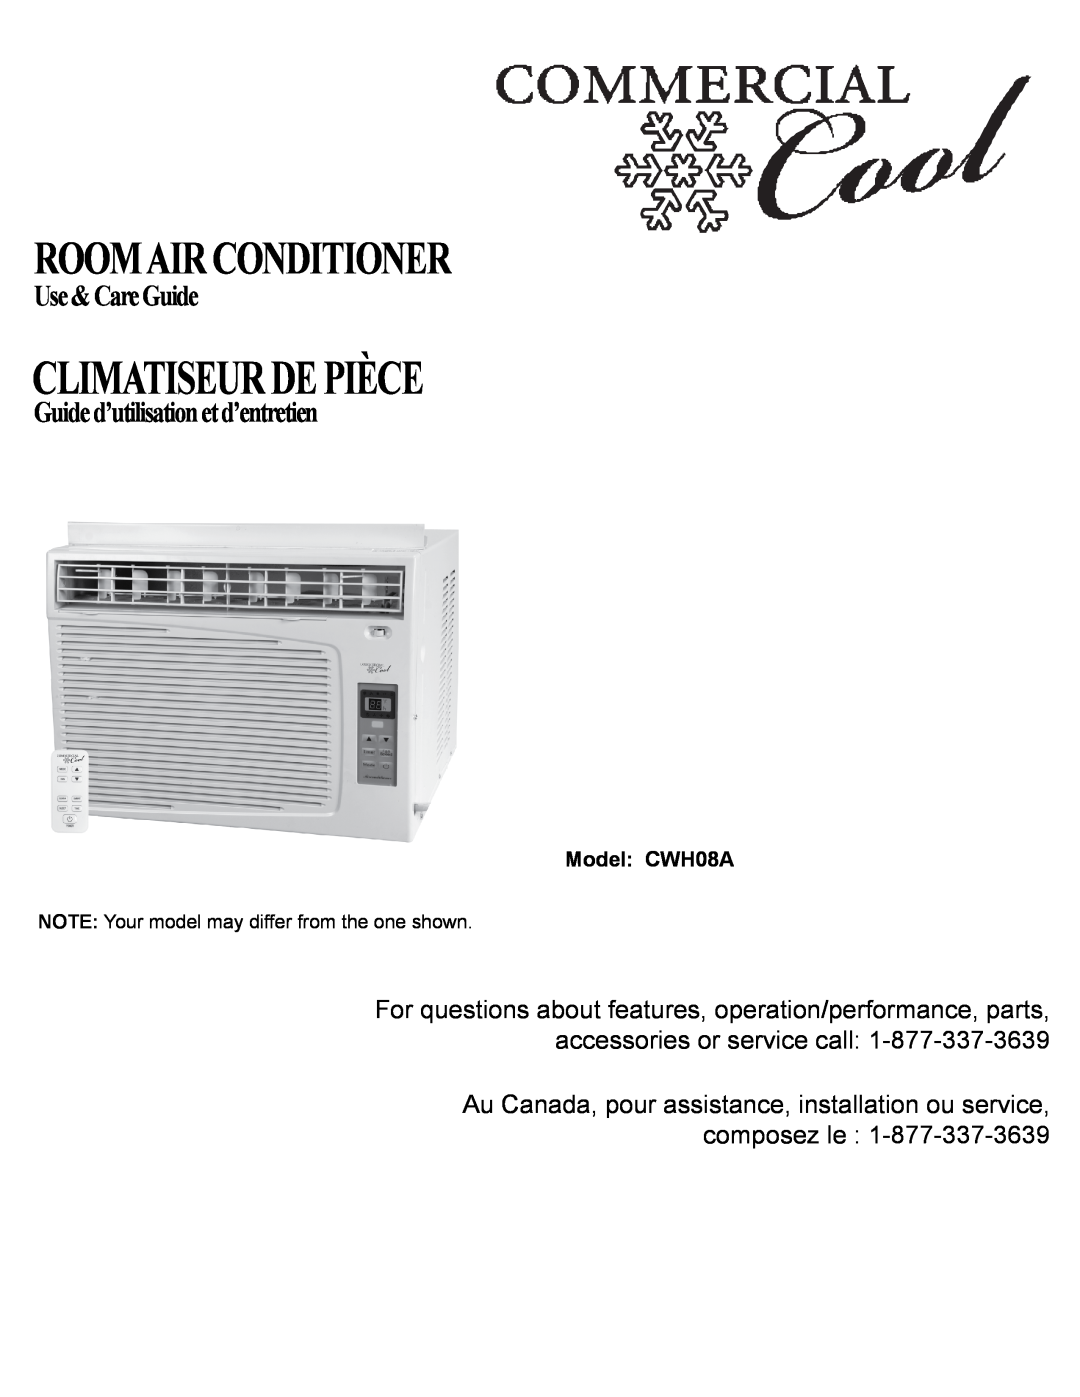 Haier CWH08A manual Climatiseurdepièce, Roomairconditioner, Use&CareGuide, Guided’utilisationetd’entretien 